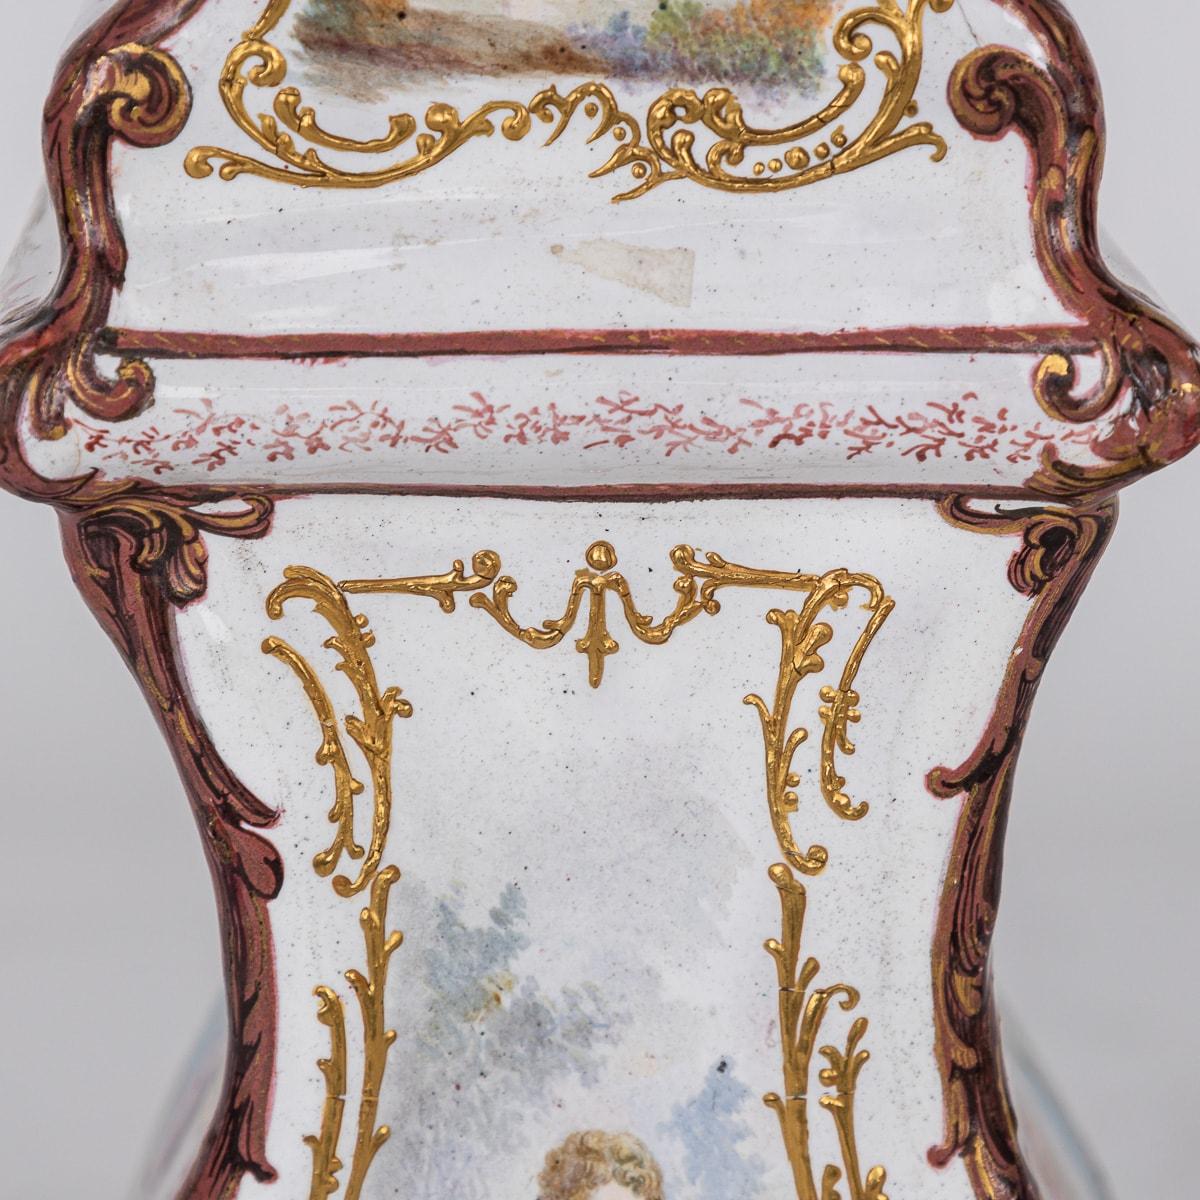 18th Century English Enamel Table Clock With Floral & Romantic Scenes c.1770 For Sale 5